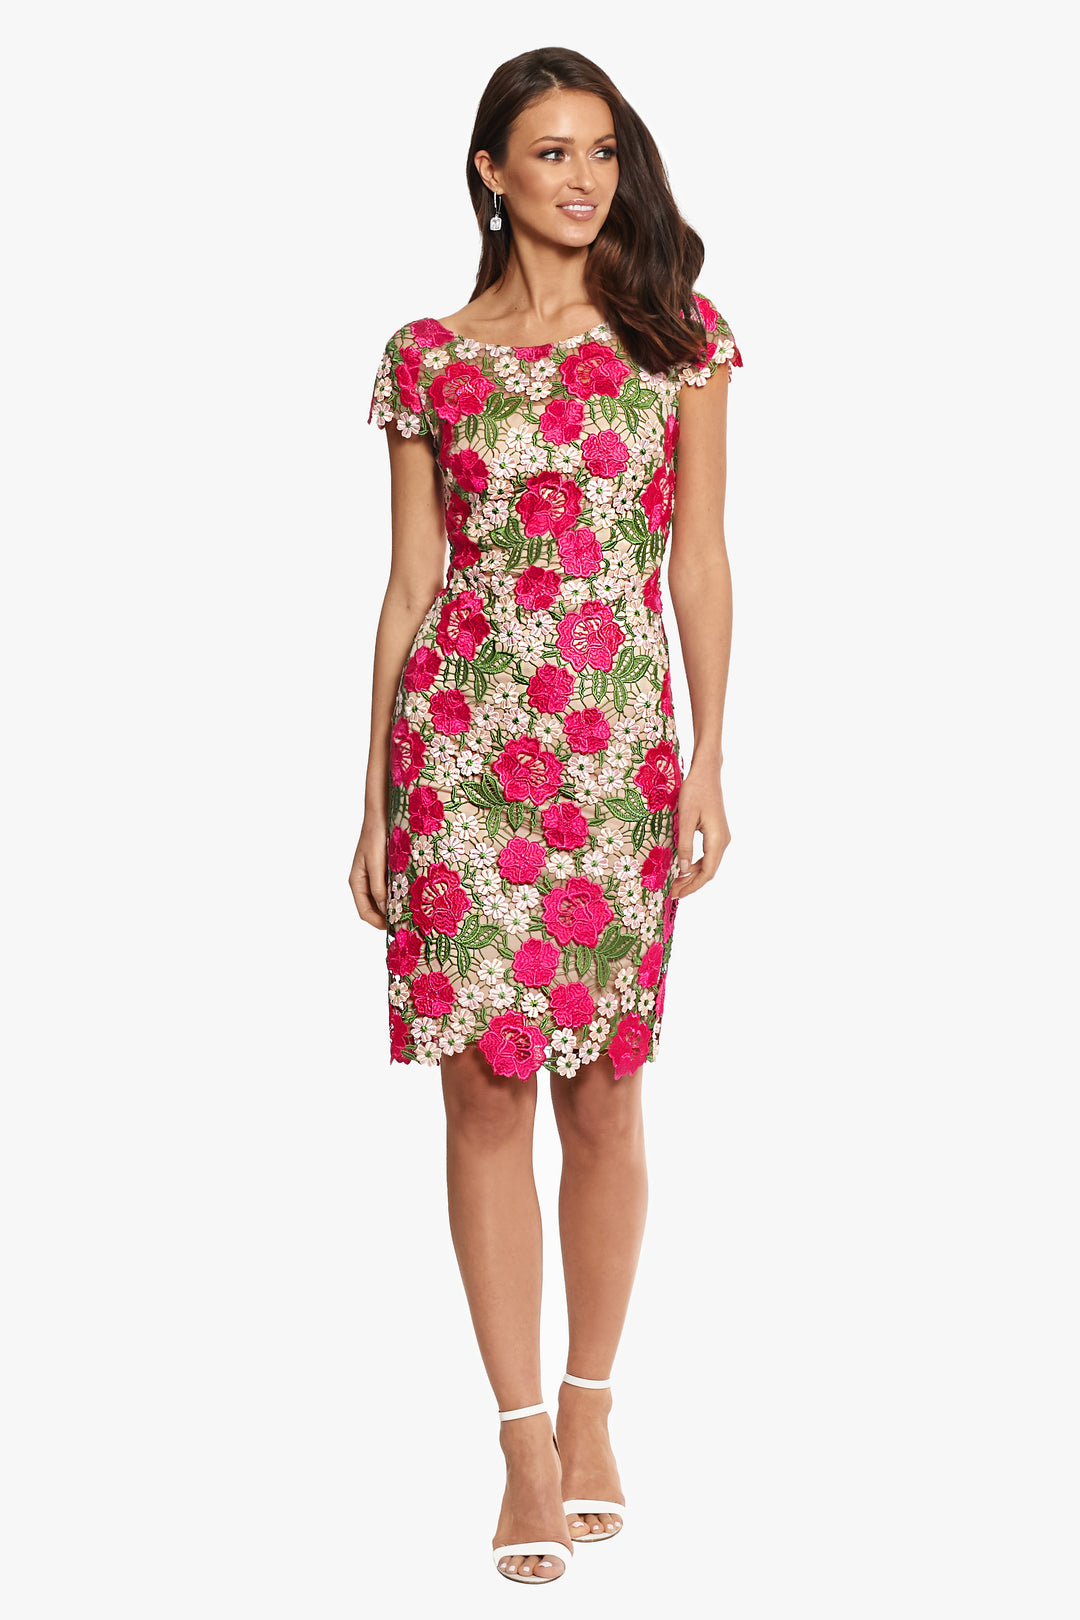 "Audrey" Short Sleeve Embroidered Flower Lace Dress